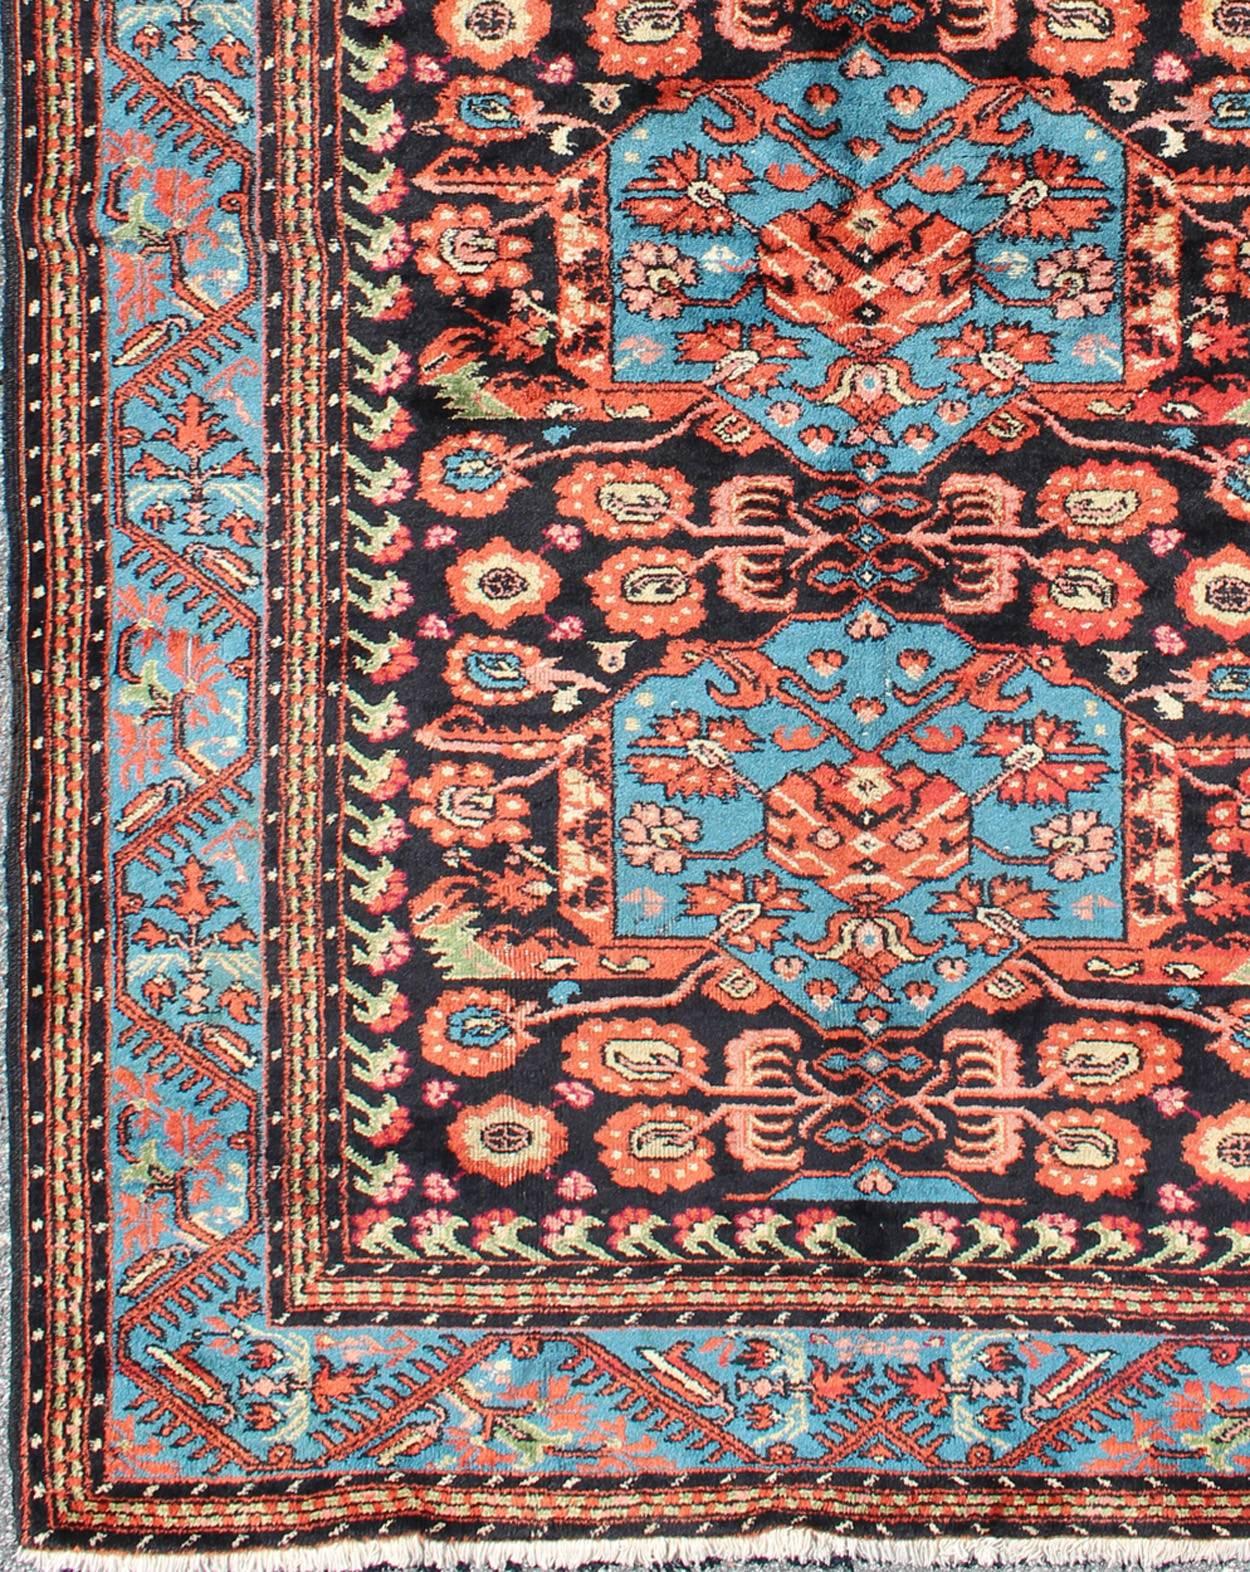 Antique  Persian Mahal Rug in Black Background and Blue Border, H-2042140, 1930's Antique Mahal Rug. Antique  Persian Mahal Rug in Black Background, Blue Border wit terracotta , light green and Salmon. This unique antique  Persian rug features three